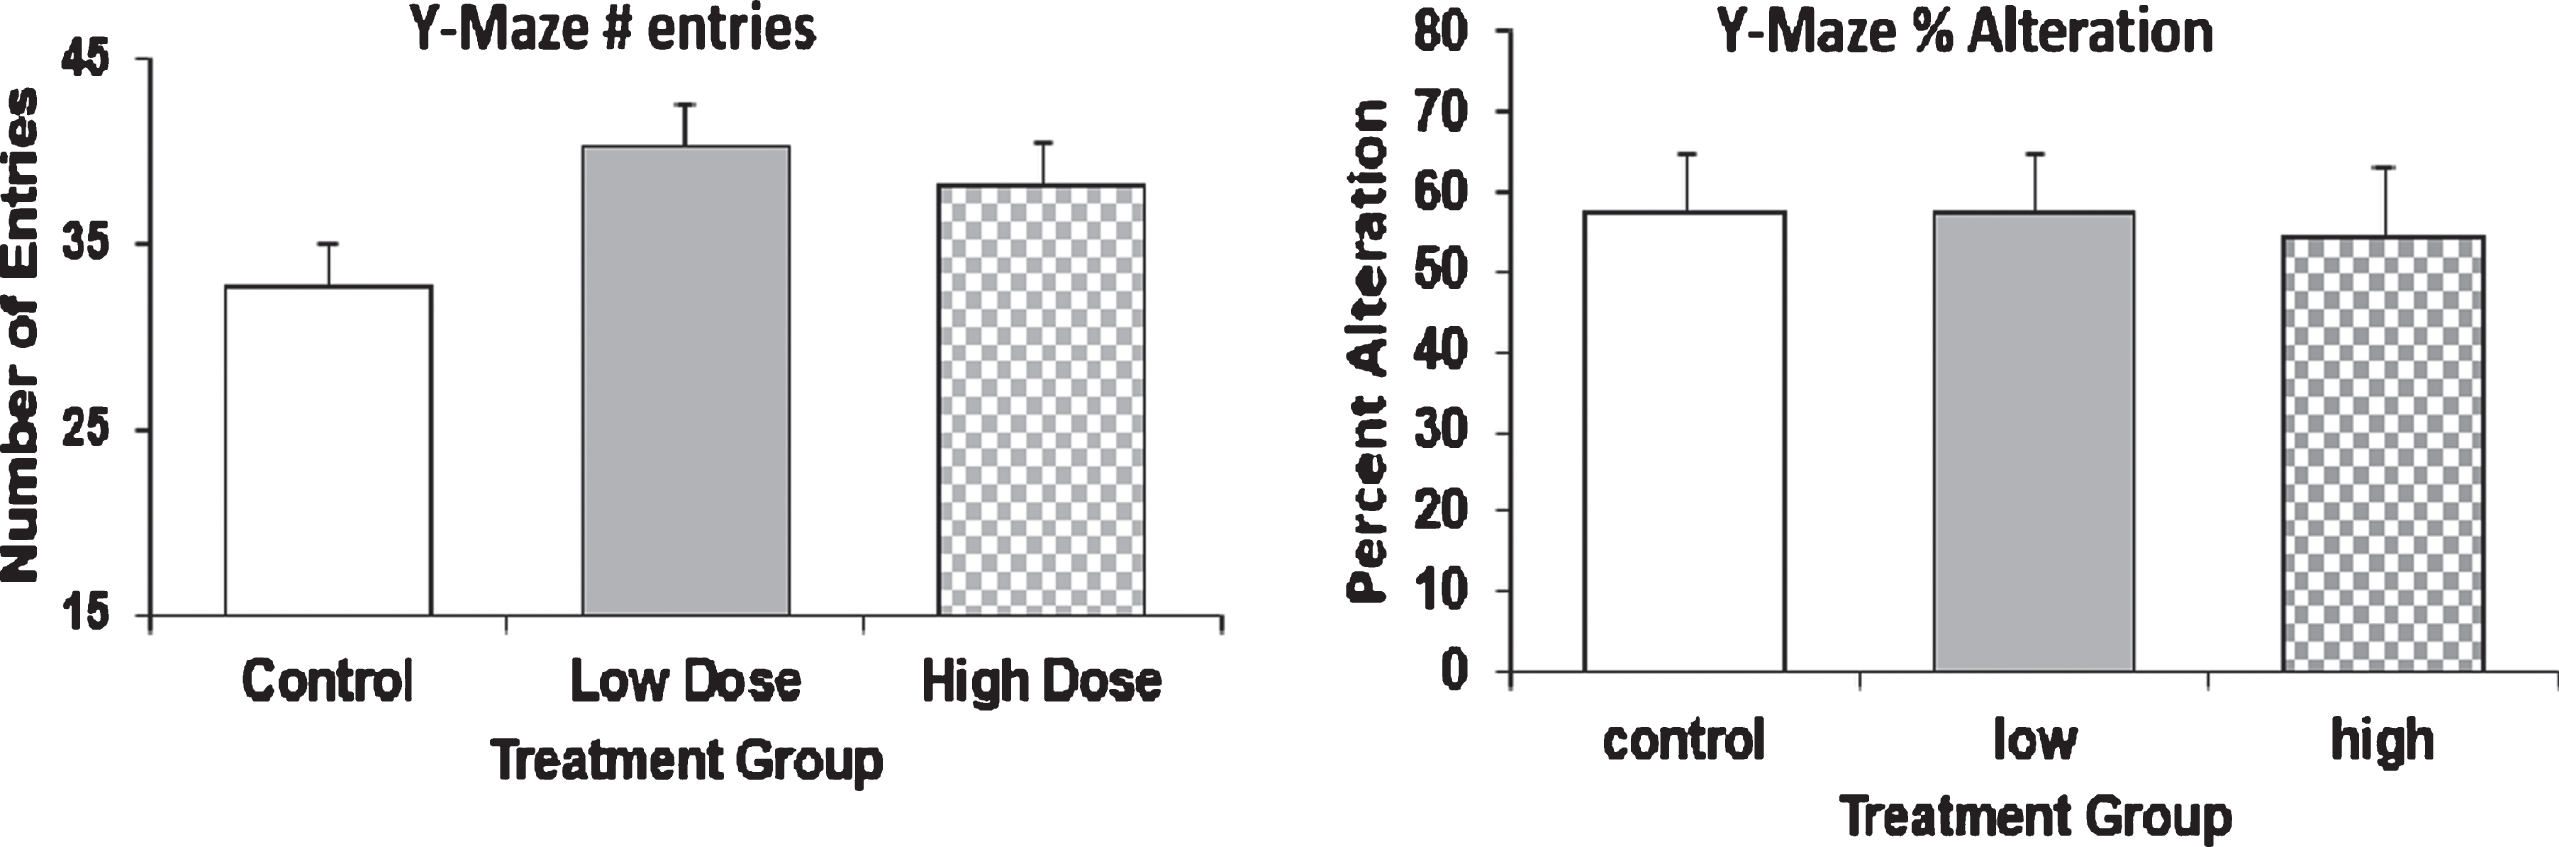 Behavioral analysis of AD mice by Y-Maze. 9-month old mice were injected with Amytrap conjugate (6.45 or 16.1 mg/kg; Low or High dose) or saline (control) biweekly for 5 months. Behavioral analysis was tested through Y-Maze. The number of entries (left) and percent alteration (right) in the Y-Maze. Values are expressed as Mean±SD.